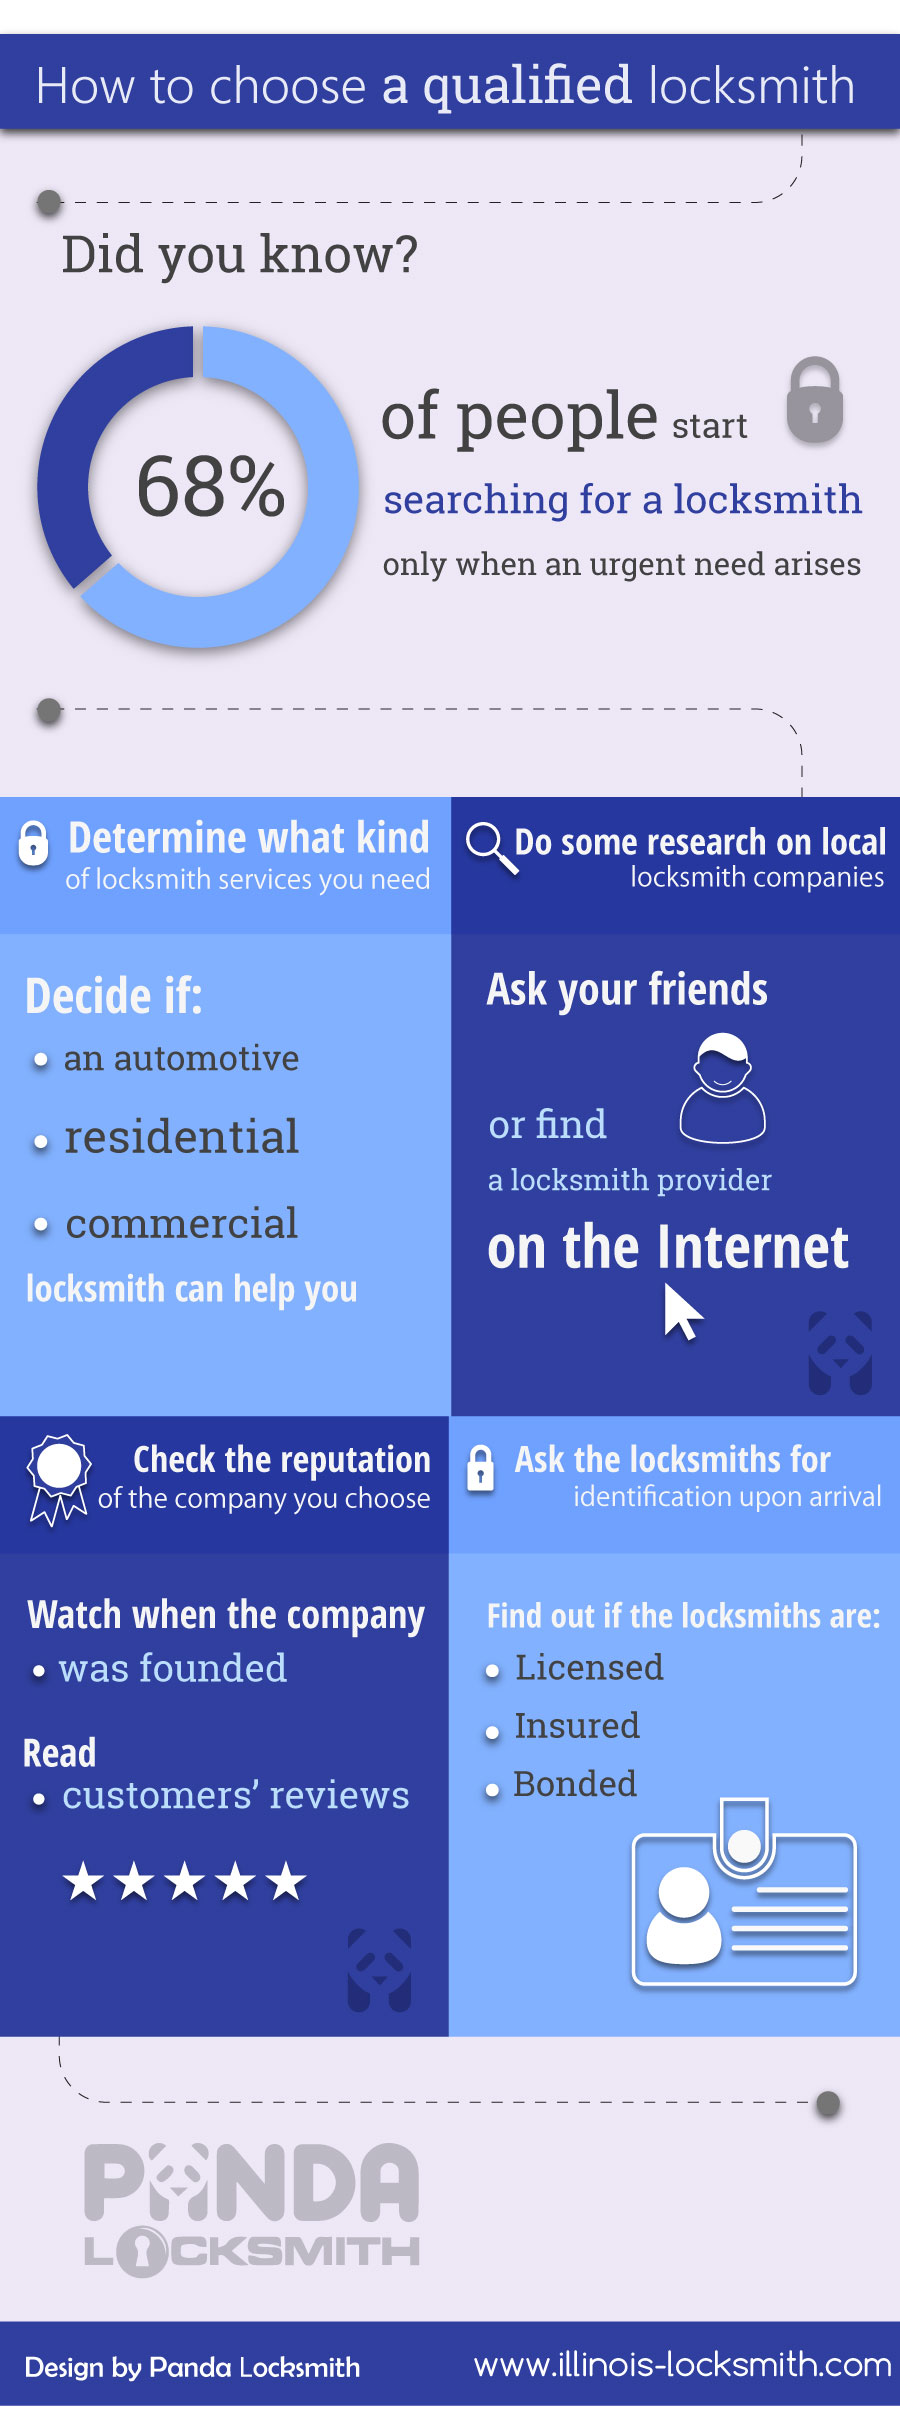 How to choose a qualified locksmith Infographic